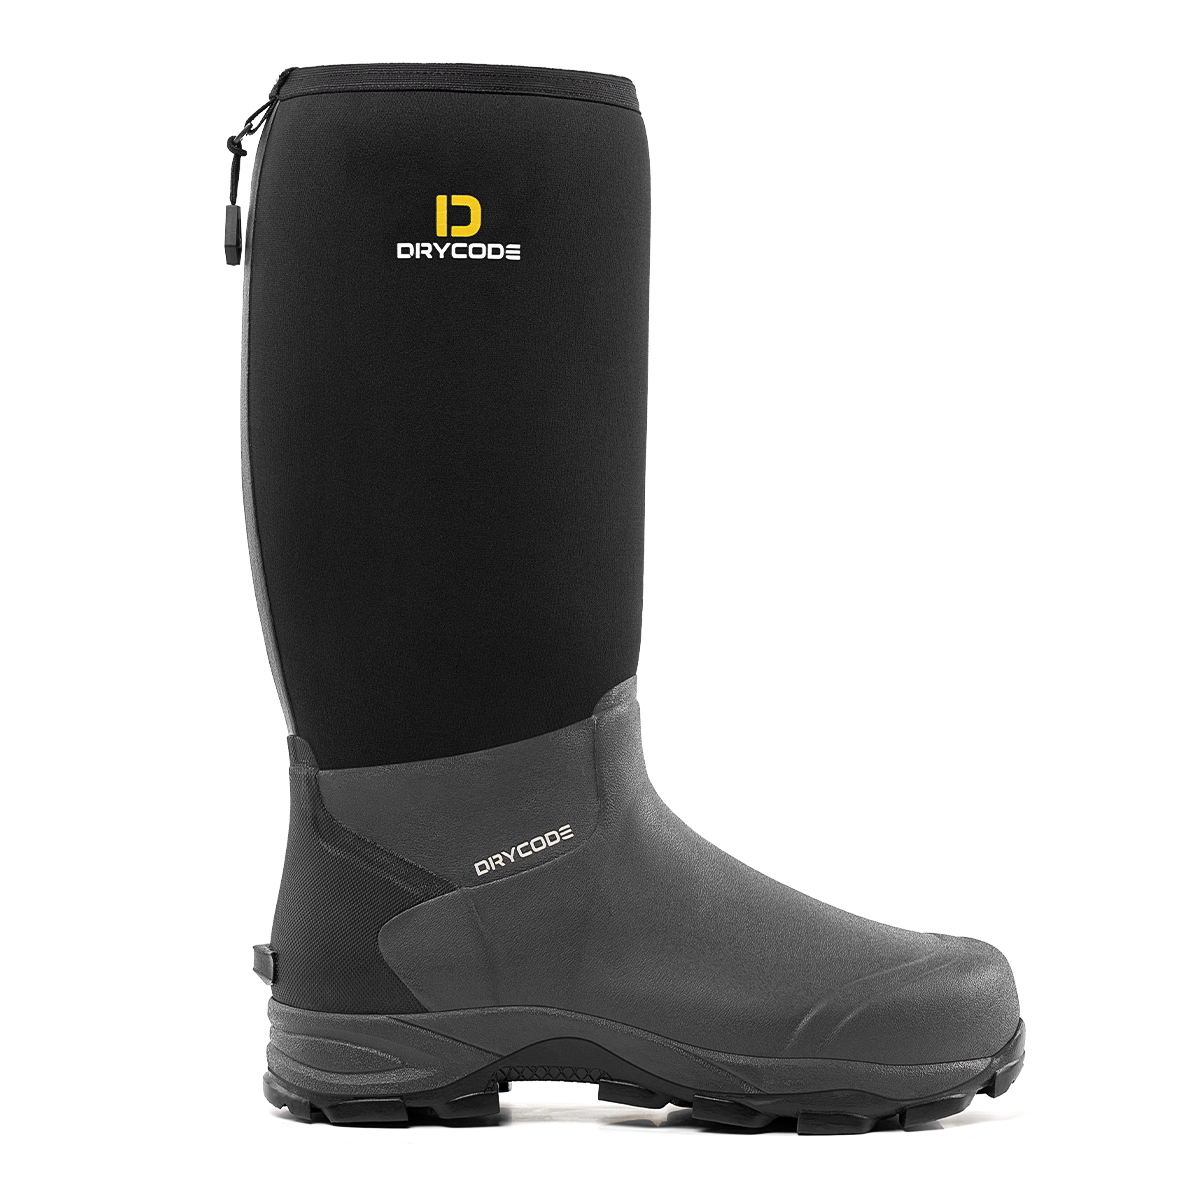 DRYCODE Rubber Hunting Boots (Black) for Men, 5.5mm Neoprene Lightweight Boots